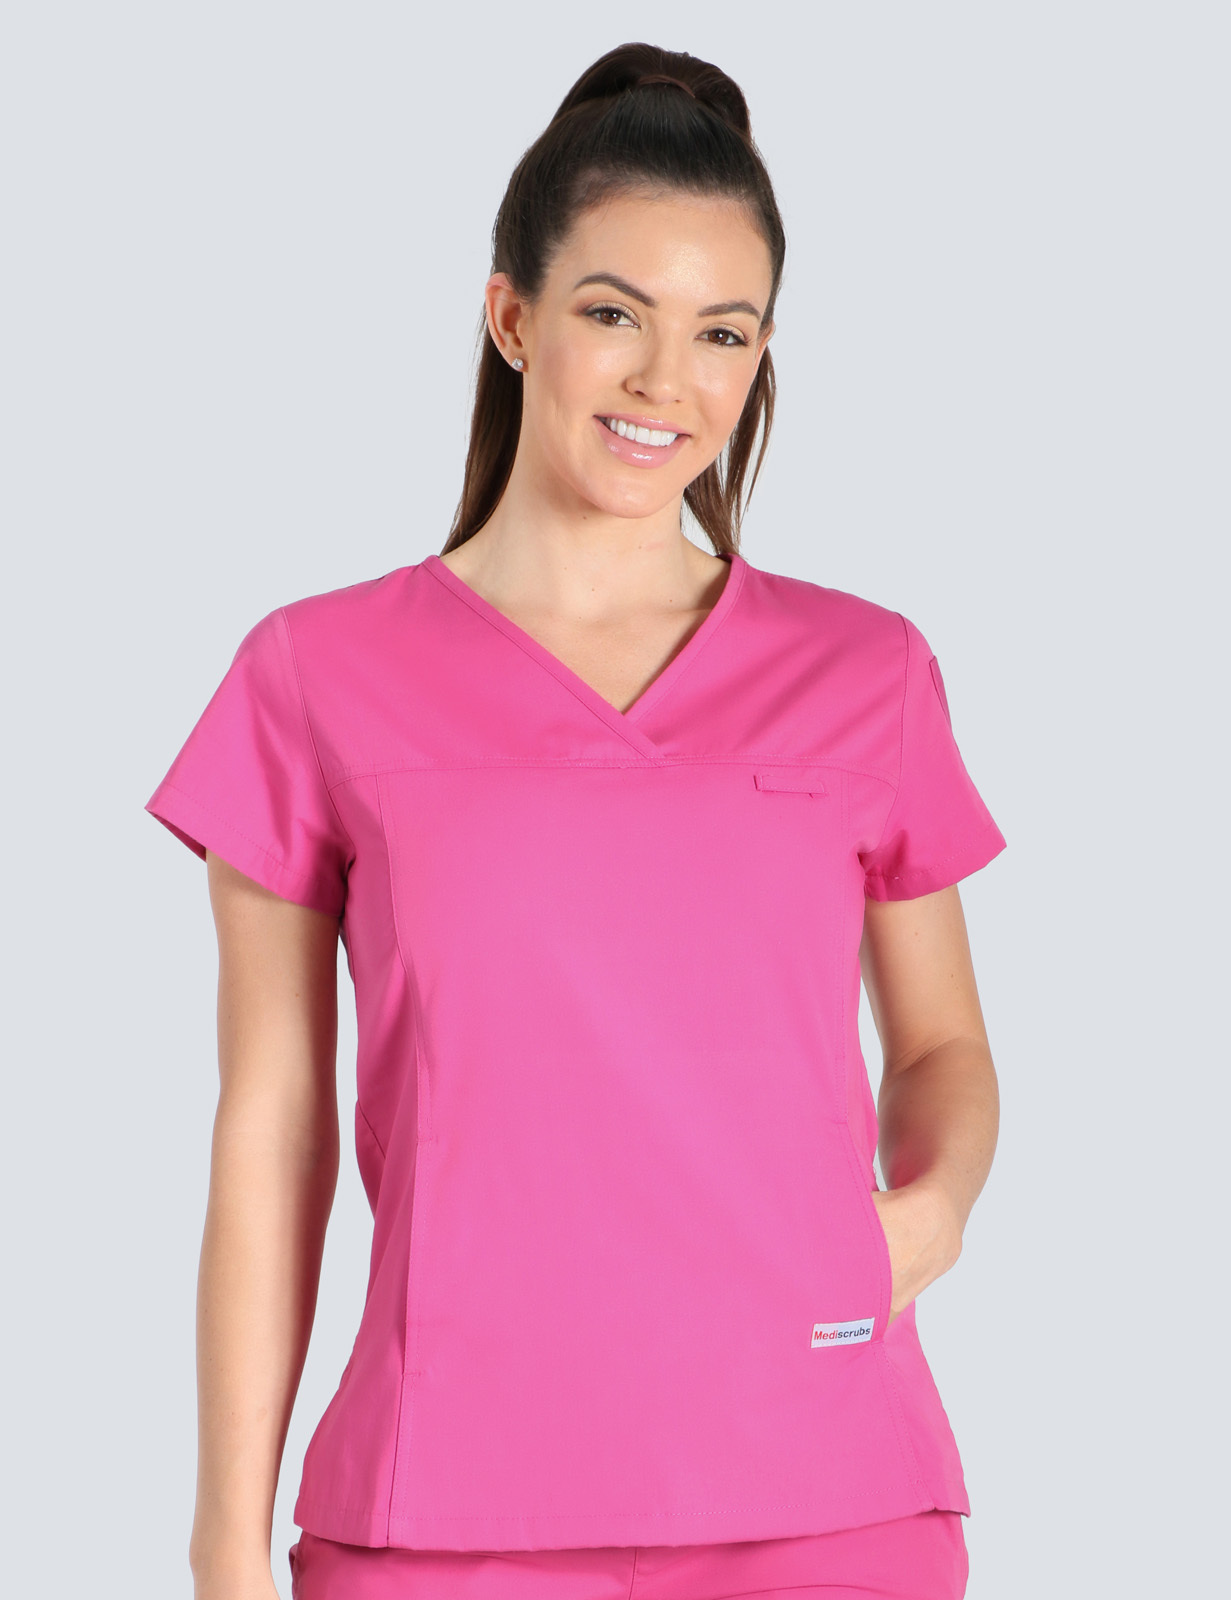 Women's Fit Solid Scrub Top - Pink - 3X Large